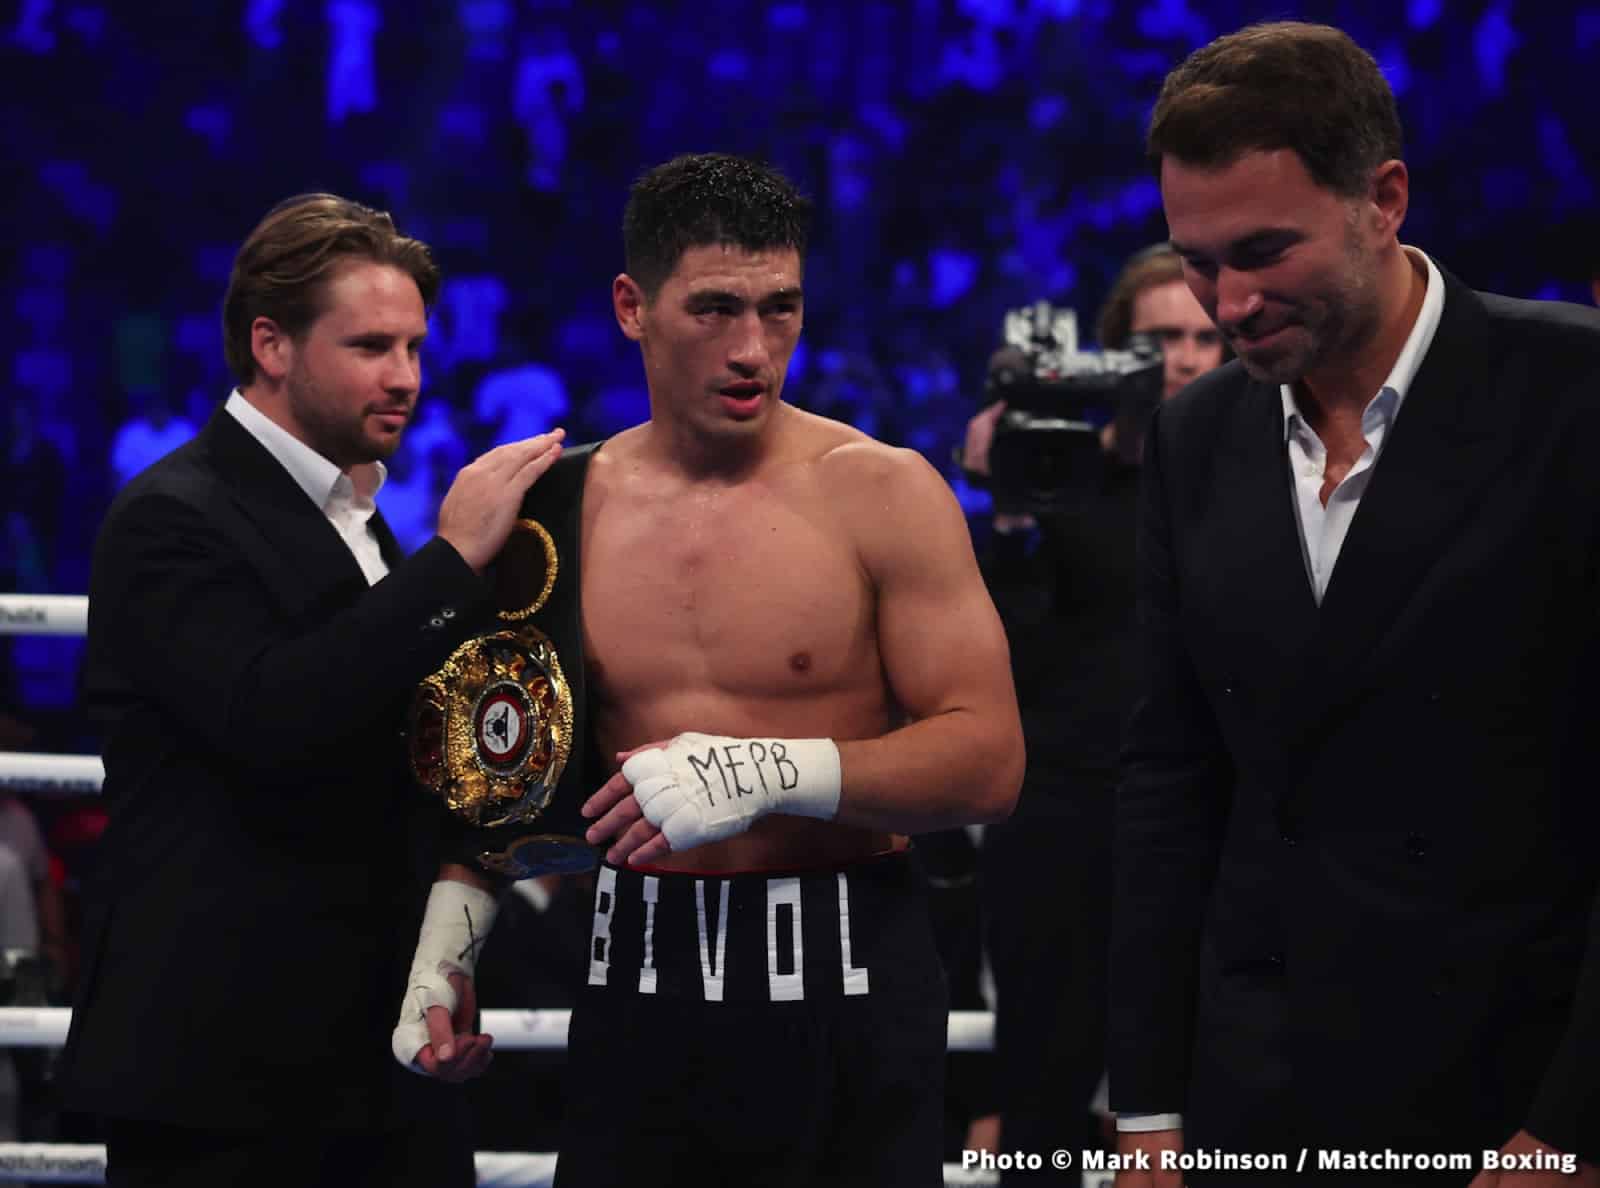 Has Dmitry Bivol Got The Fighter Of The Year Award All Sewn Up?